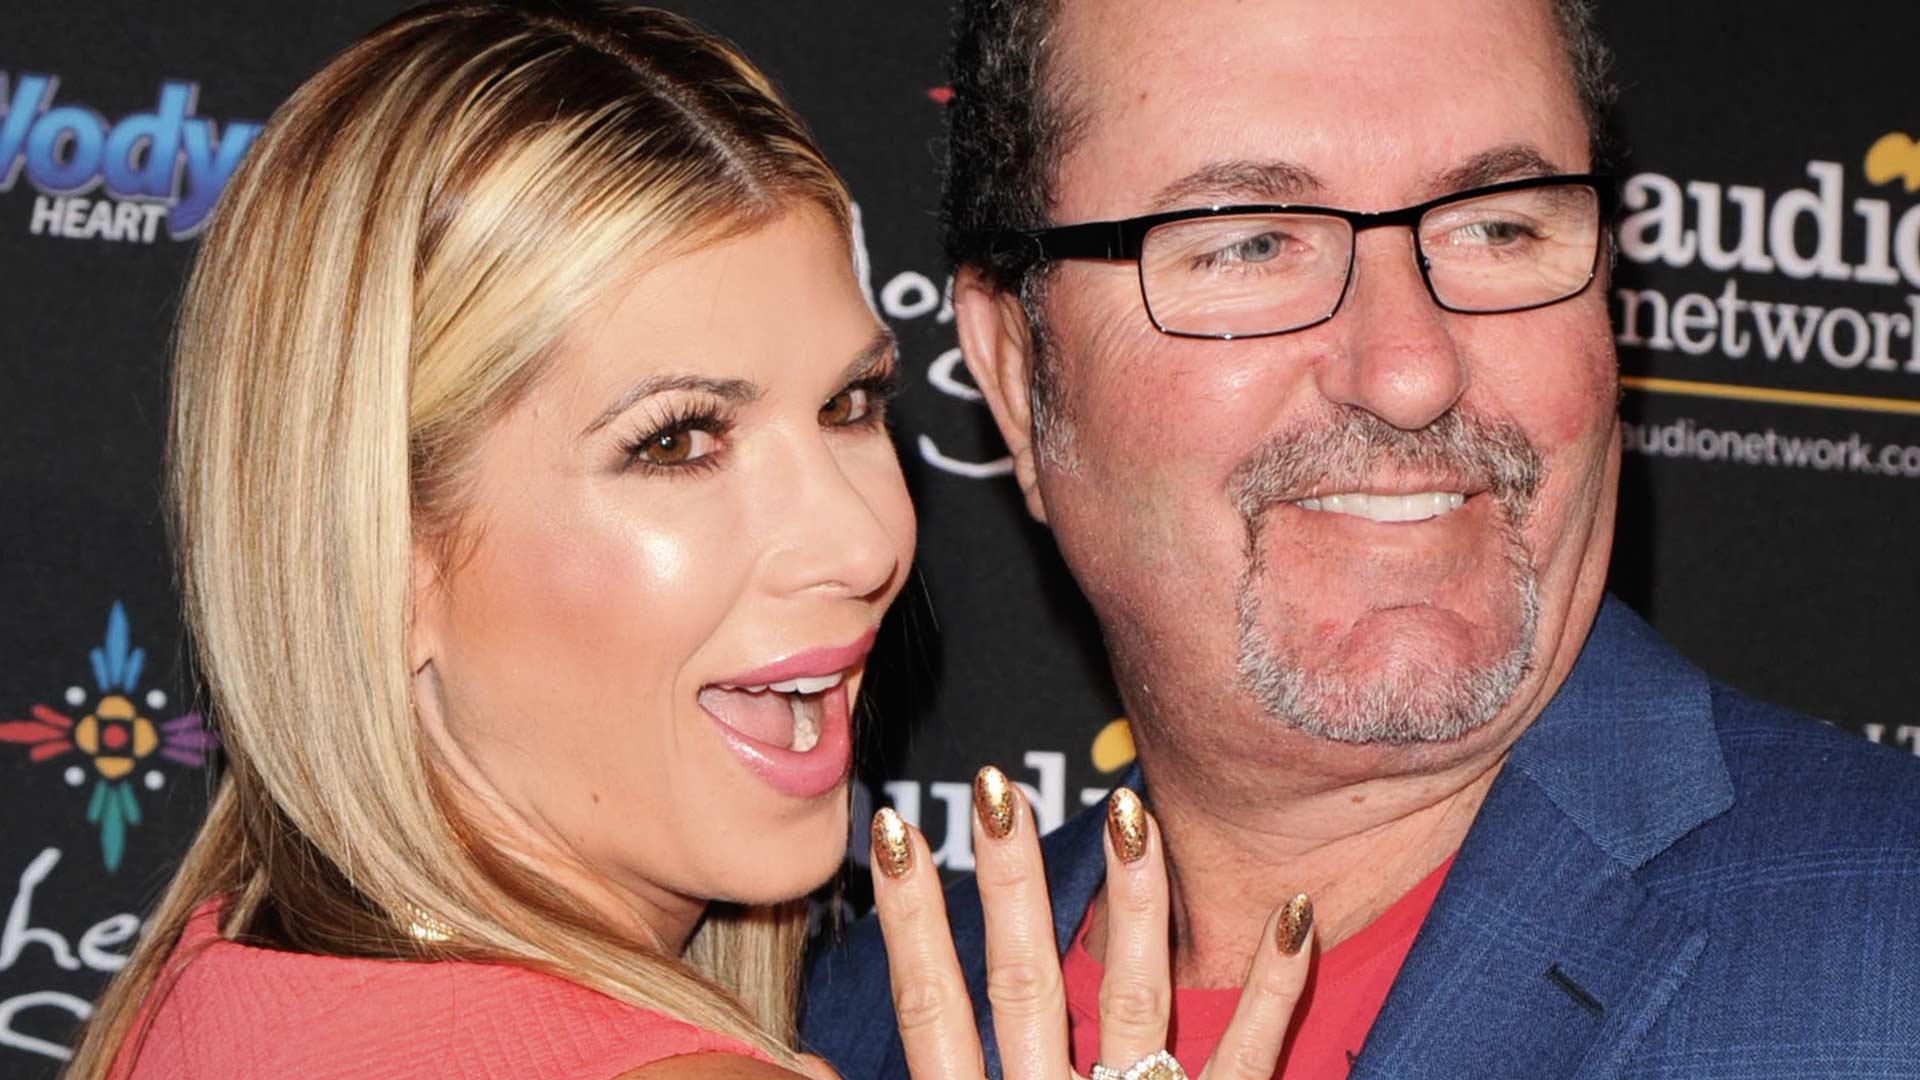 ‘RHOC’ Star Alexis Bellino’s Ex-Husband Clear in $350,000 Battle with Ex-Business Partner